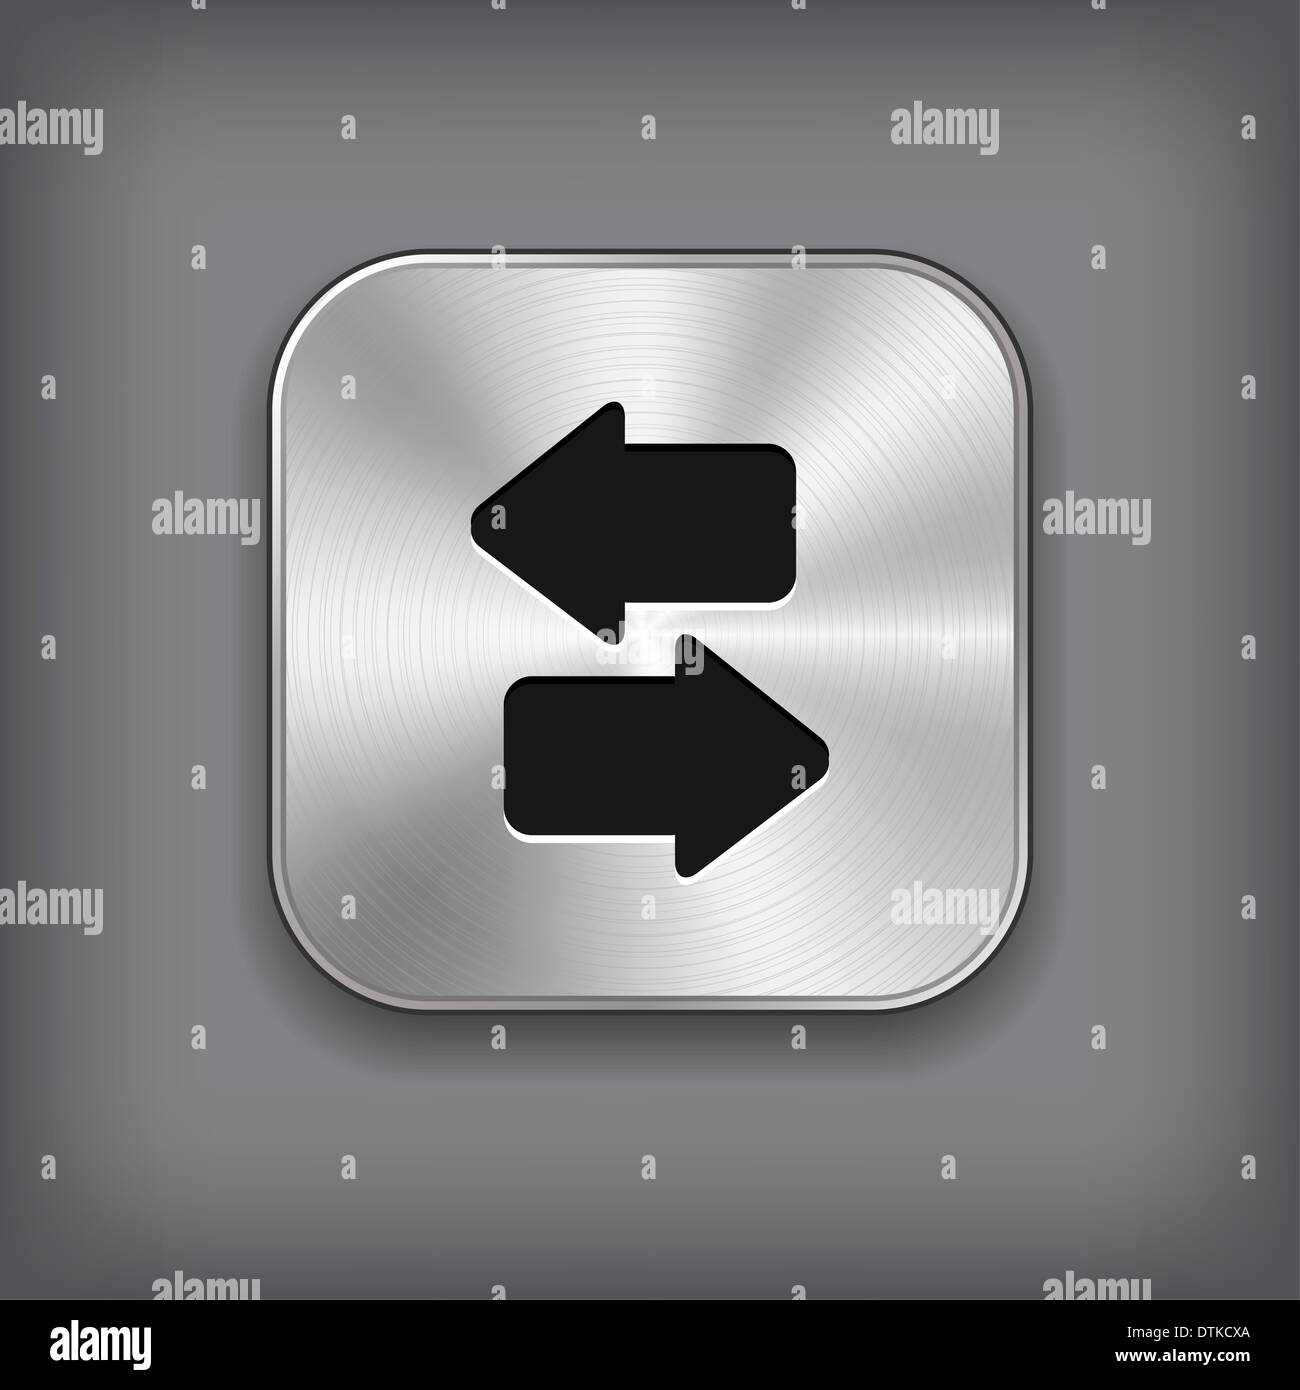 Synchronization icon - metal app button with shadow Stock Photo